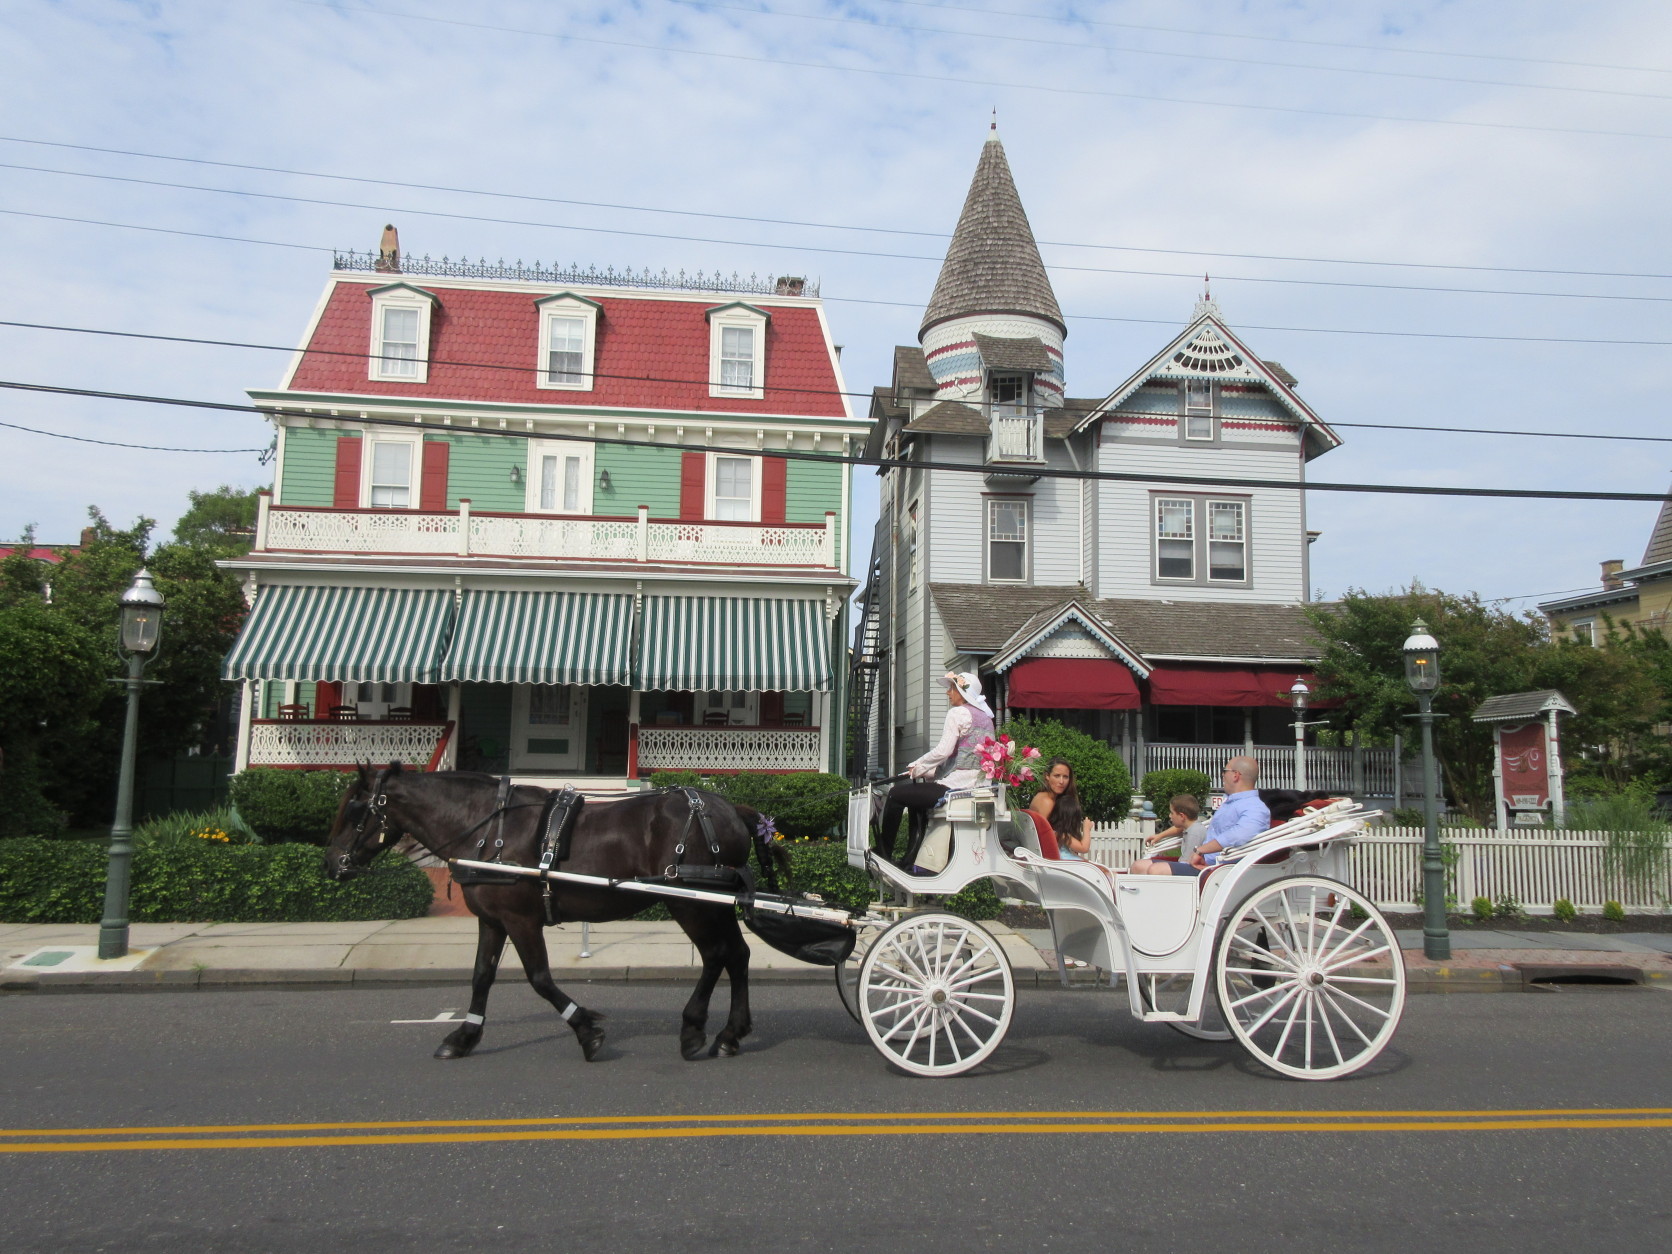 This June 26, 2015 photo shows visitors taking a horse carriage tour of Cape May, N.J. The city's hundreds of Victorian homes constitute what the National Historic Landmarks program calls one of the largest collections of 19th century frame buildings in the United States. Their gables, towers, domes, arched windows and inviting front porches, often trimmed in bright colors, create charming and whimsical streetscapes.  (AP Photo/Beth J. Harpaz)